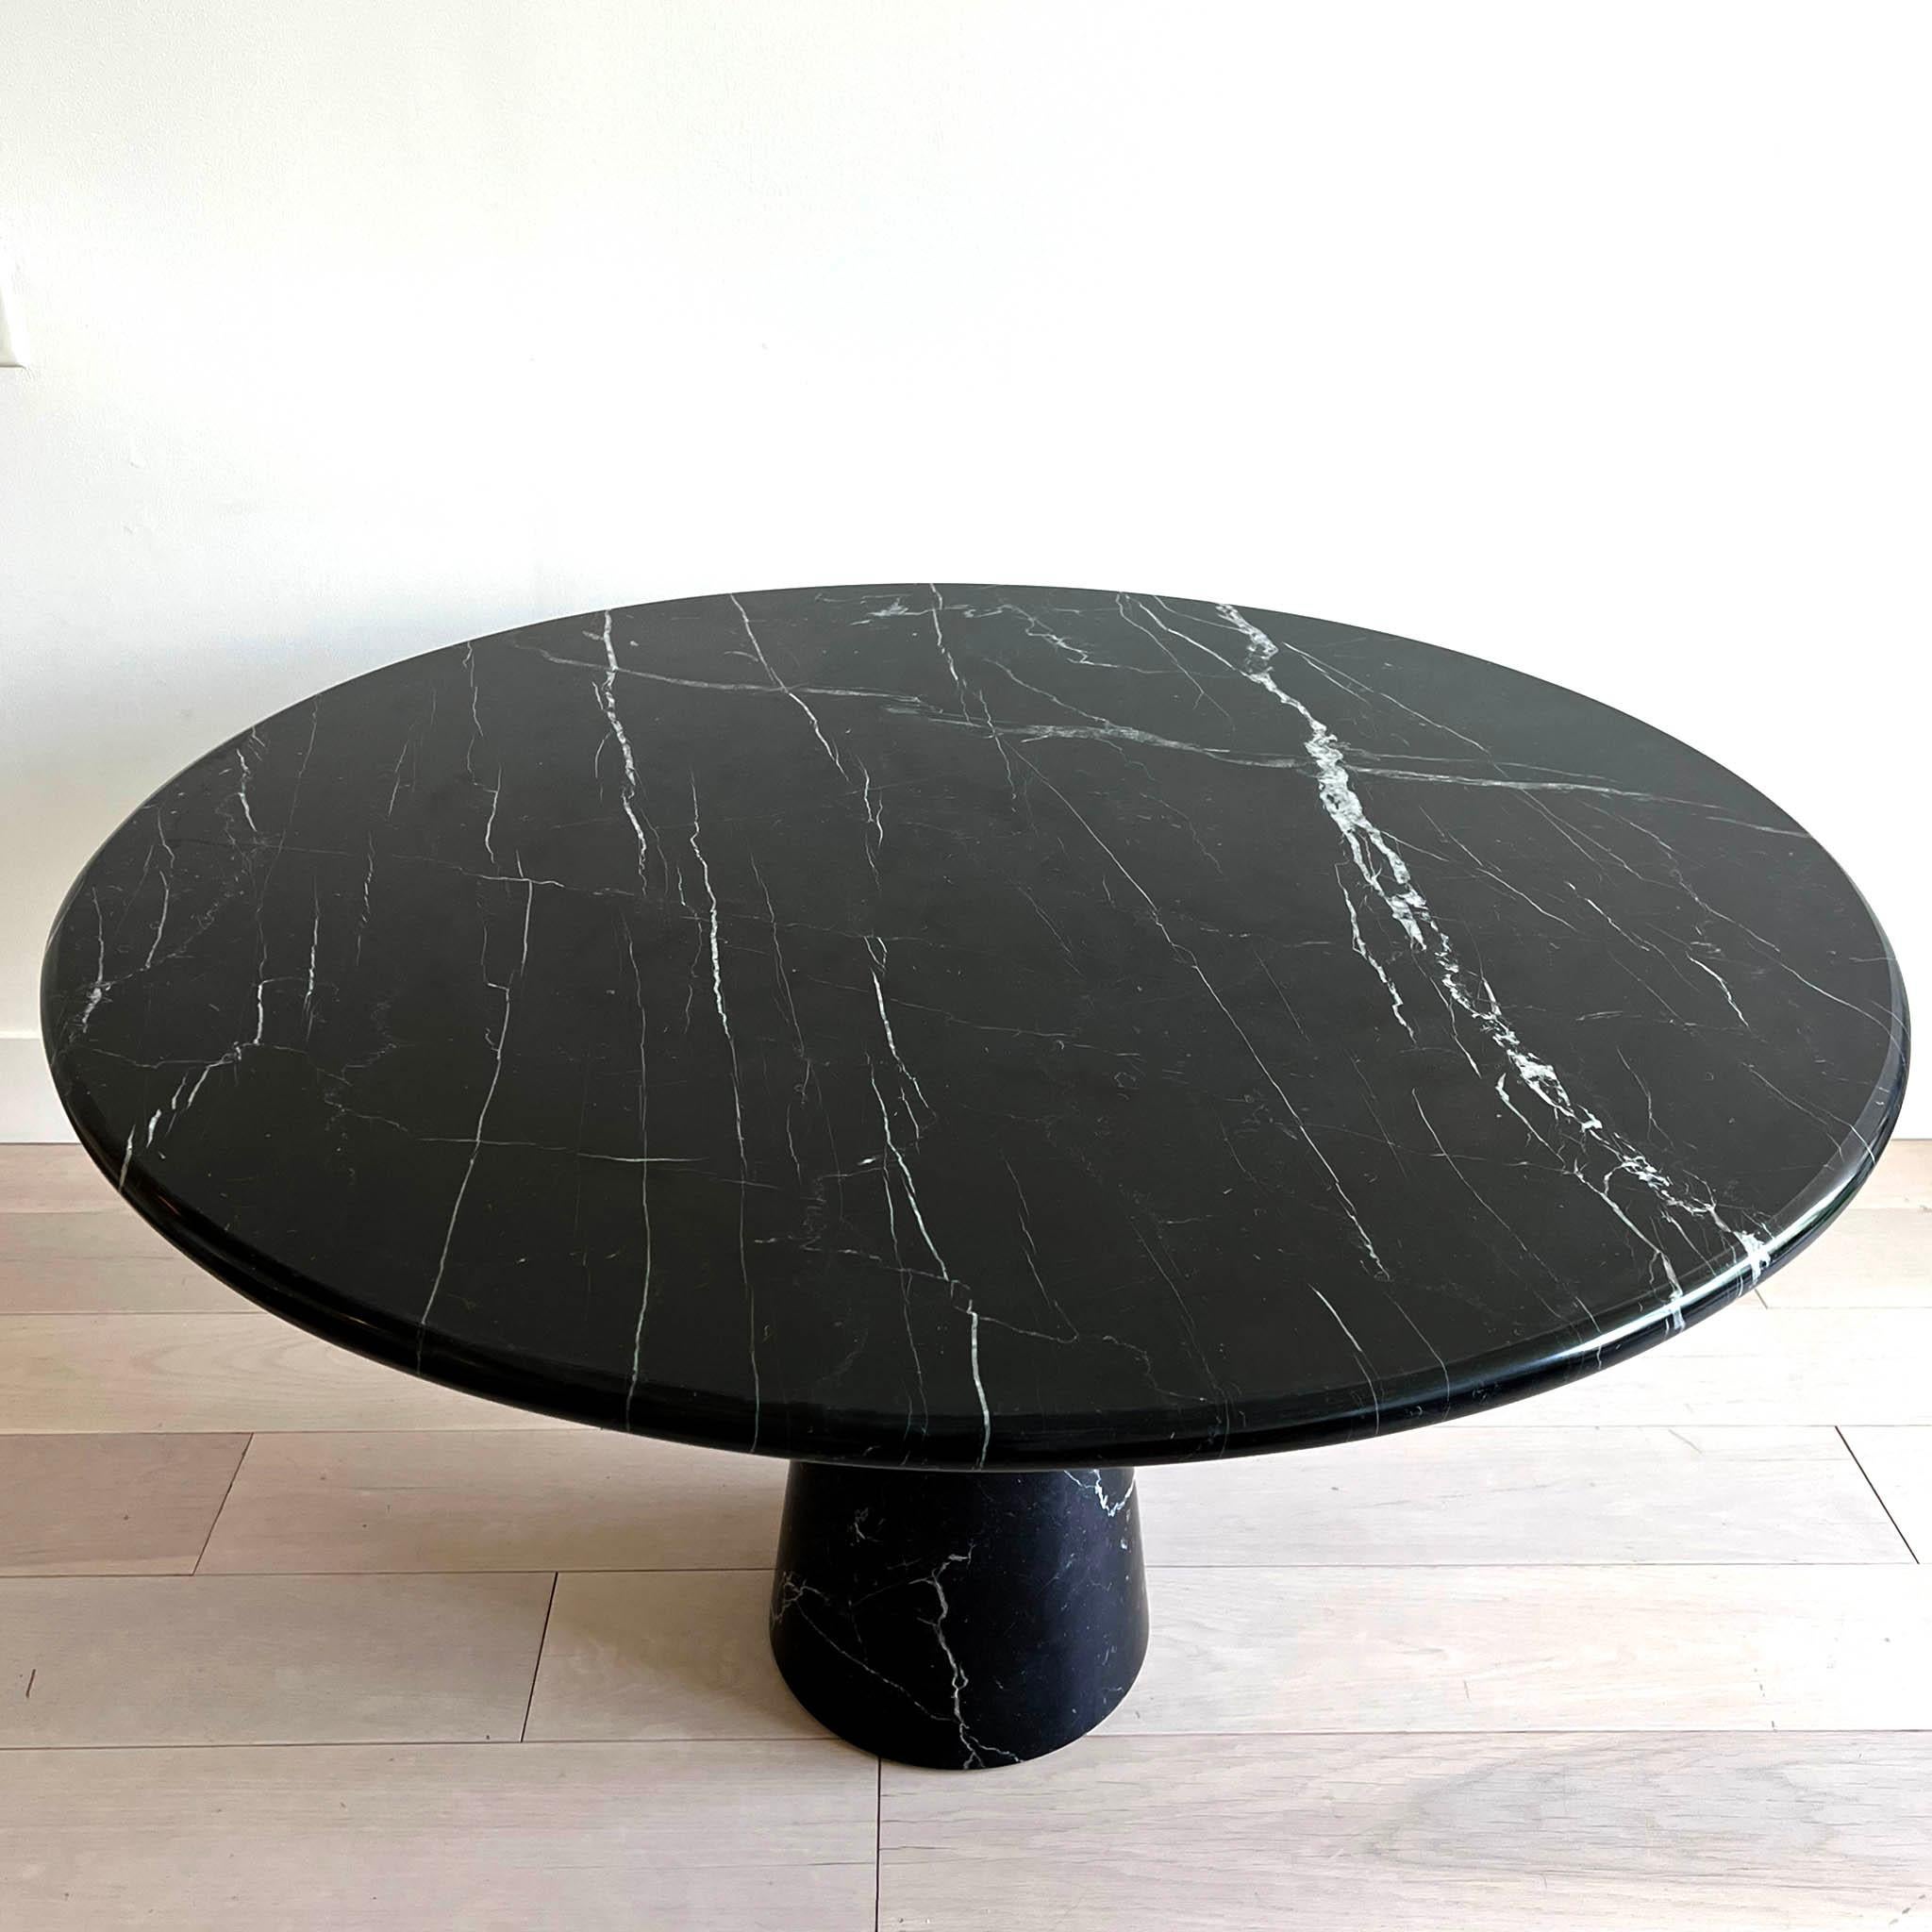 An original Angelo Mangiarotti round marble dining table from the 1960s-1970s. Stunning black marble with beautiful veining. Very good condition. 

Angelo Mangiarotti (26 February 1921 – 2 July 2012) was one of the best known architects and